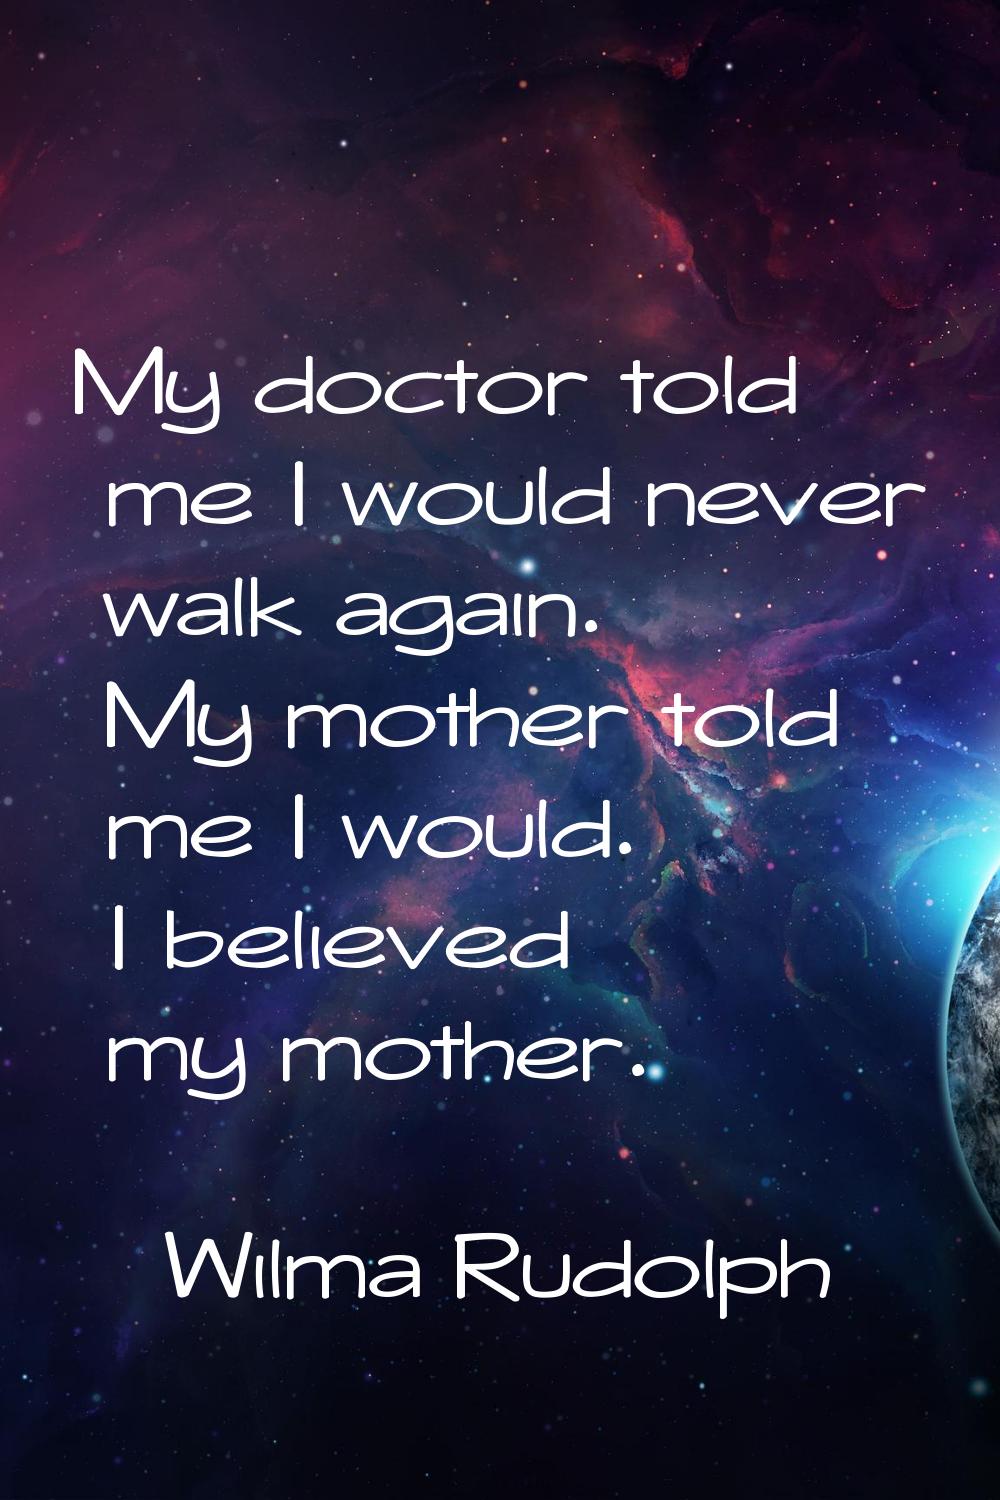 My doctor told me I would never walk again. My mother told me I would. I believed my mother.